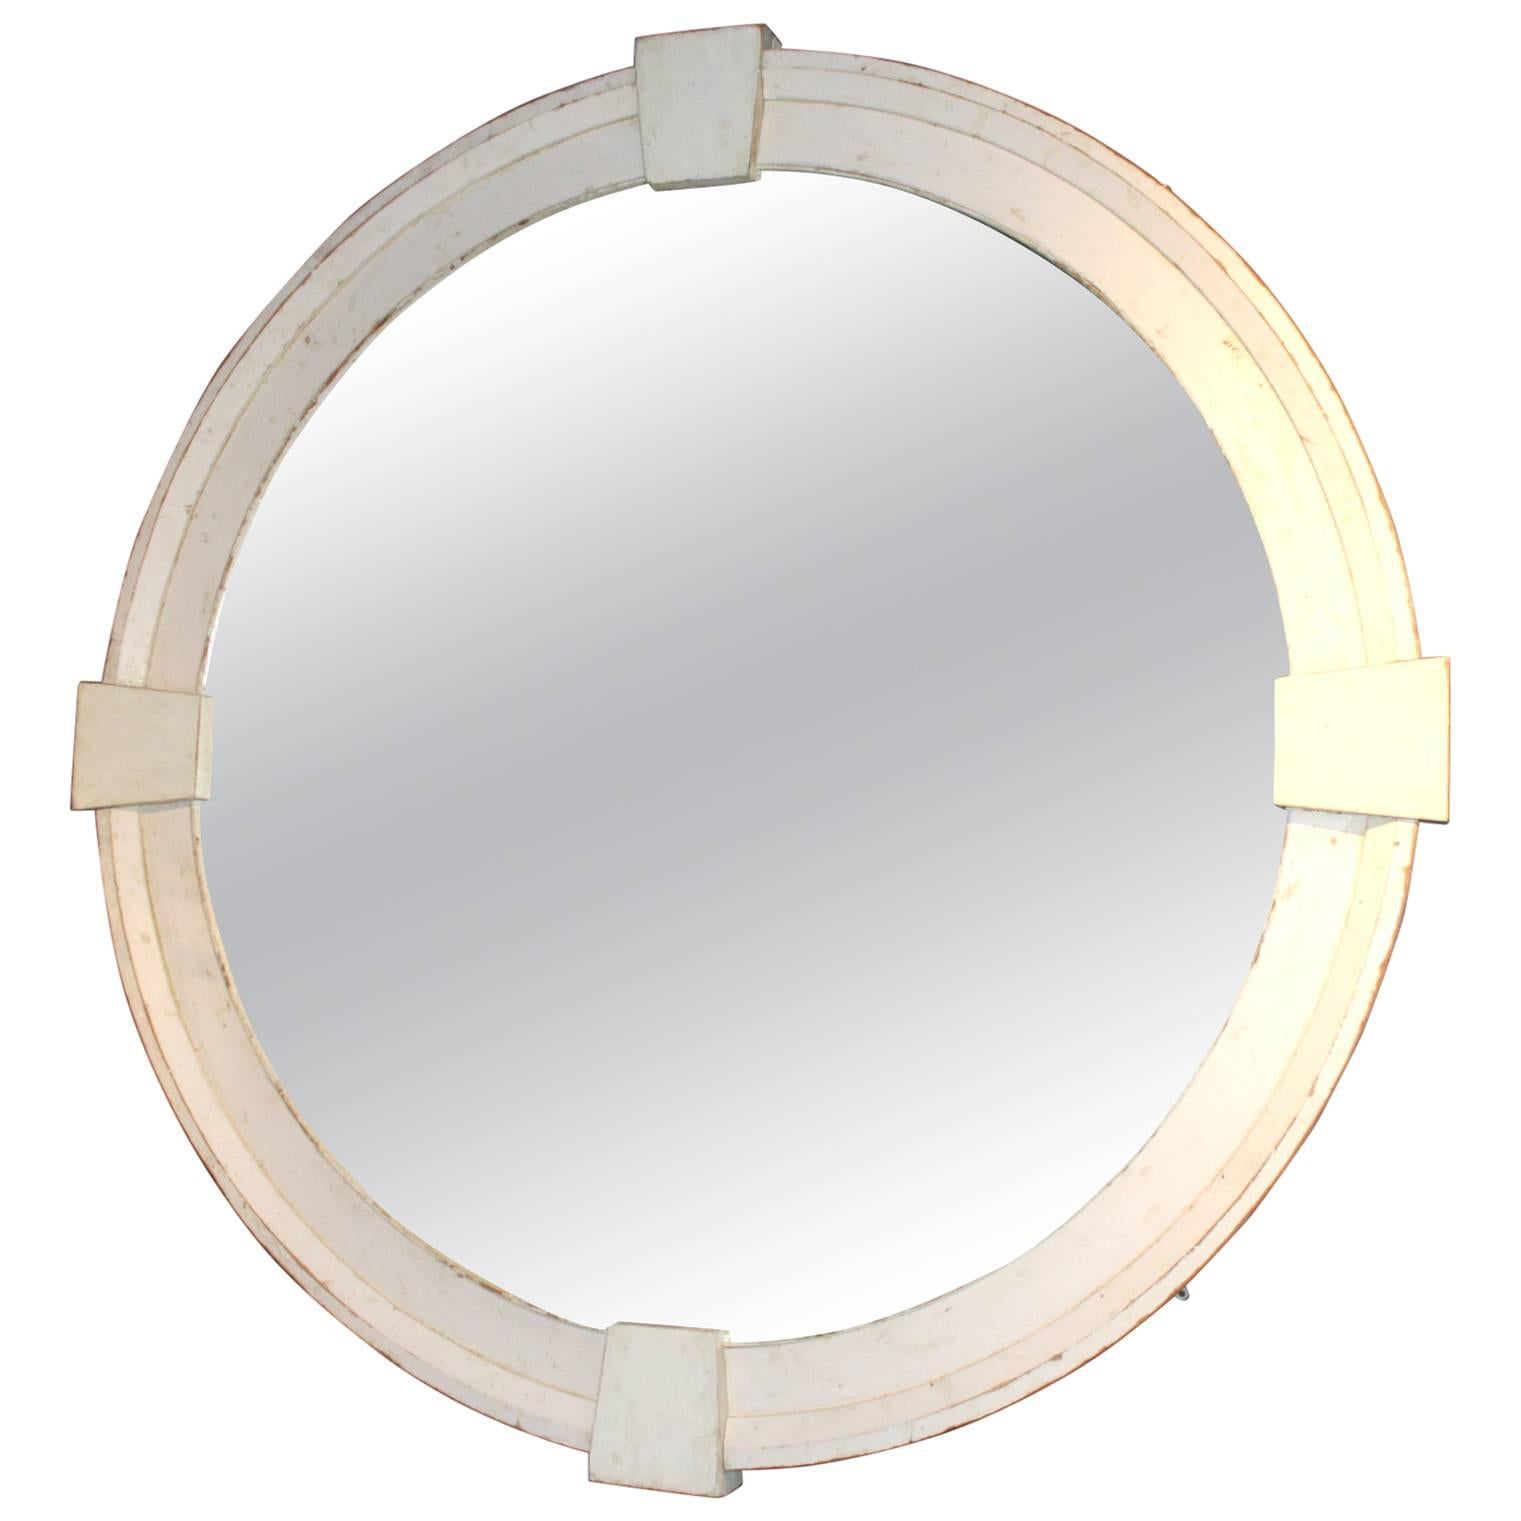 Monumental Round Wood Framed Mirror with Architectural Keystone Decoration